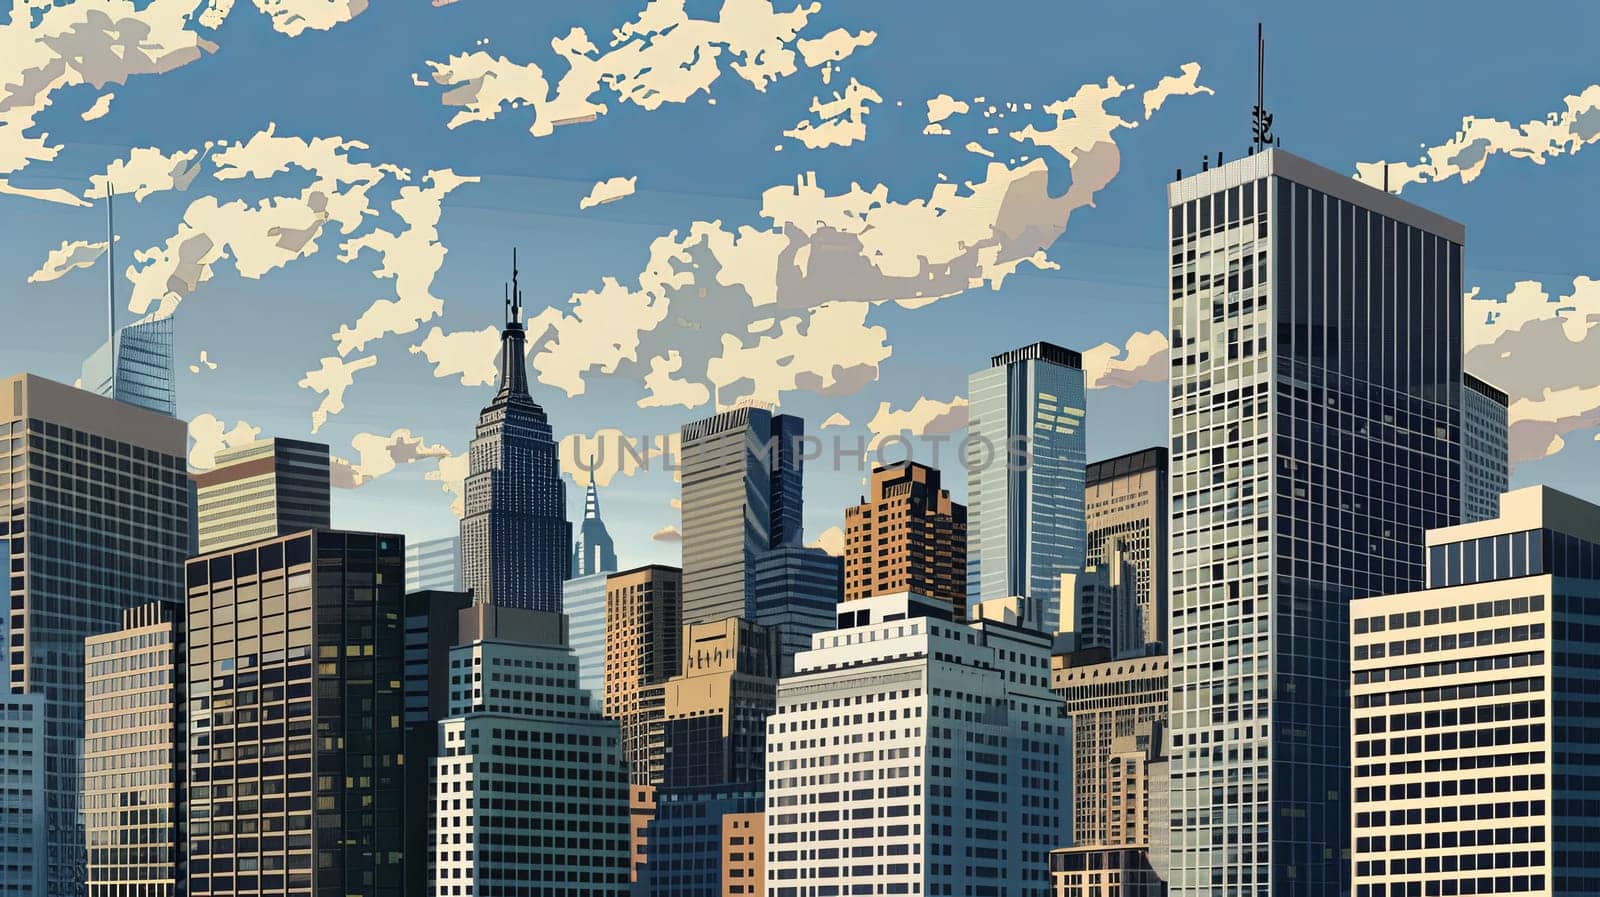 A detailed painting of a cityscape featuring tall skyscrapers under a cloudy sky.